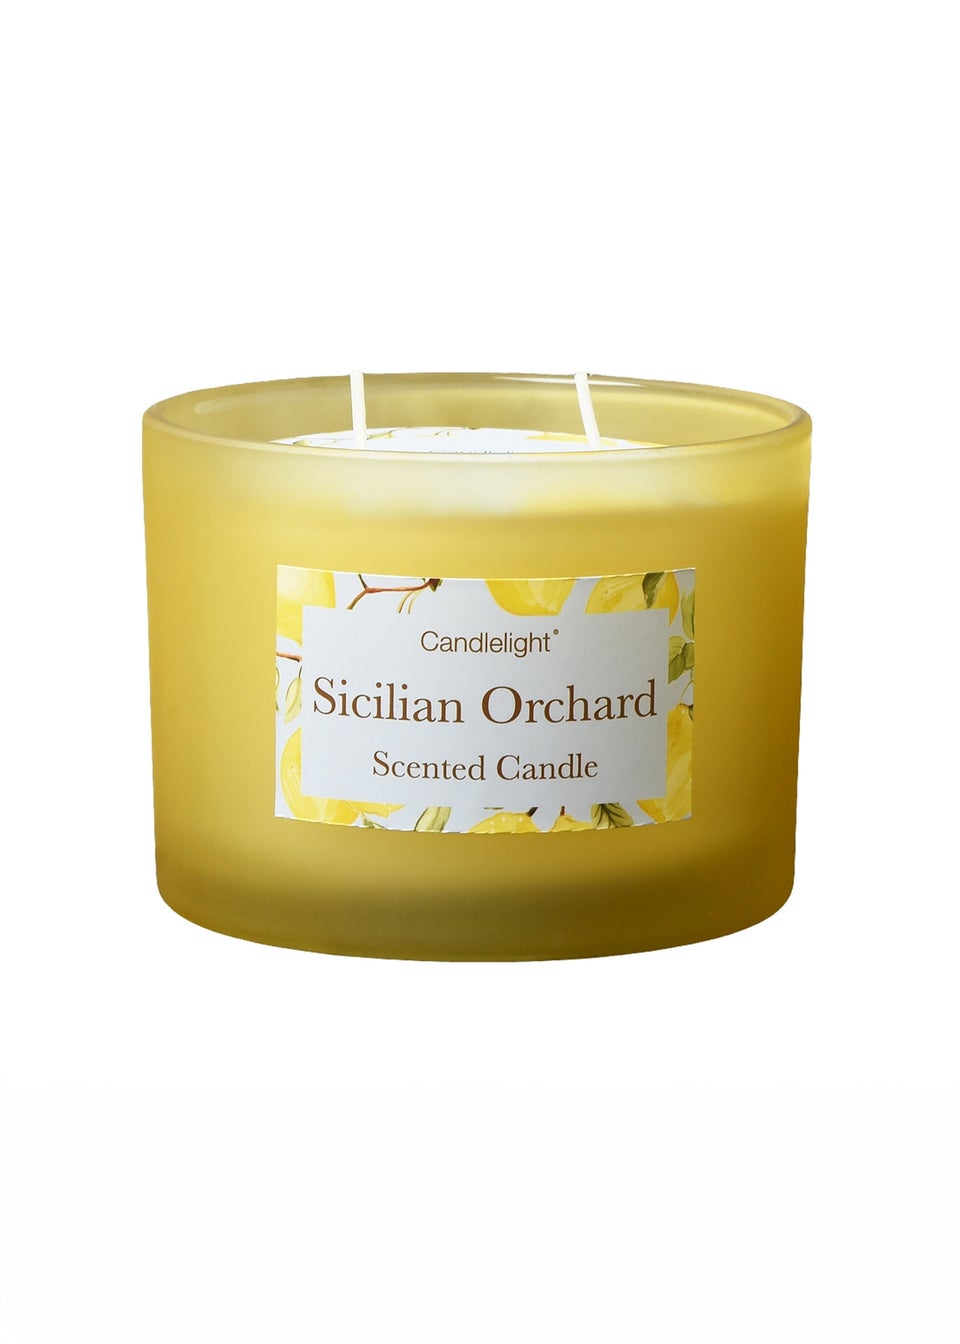 Candlelight Yellow Sicilian Orchard Scented Candle